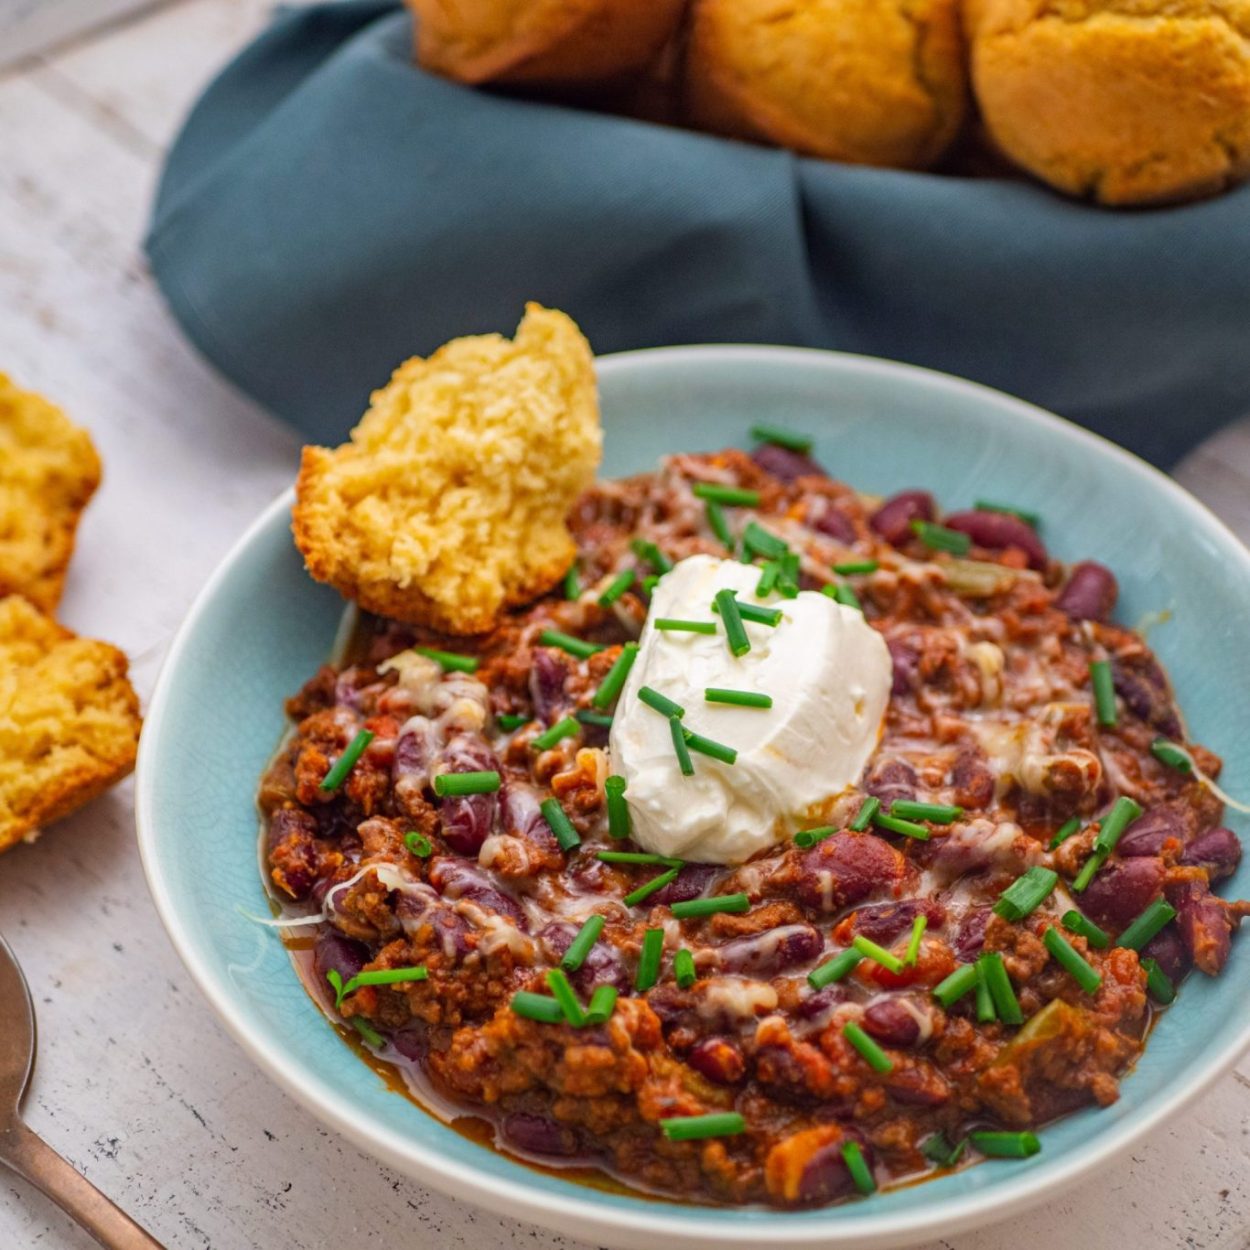 Superbowl’s chili – Chili con carne – This is us